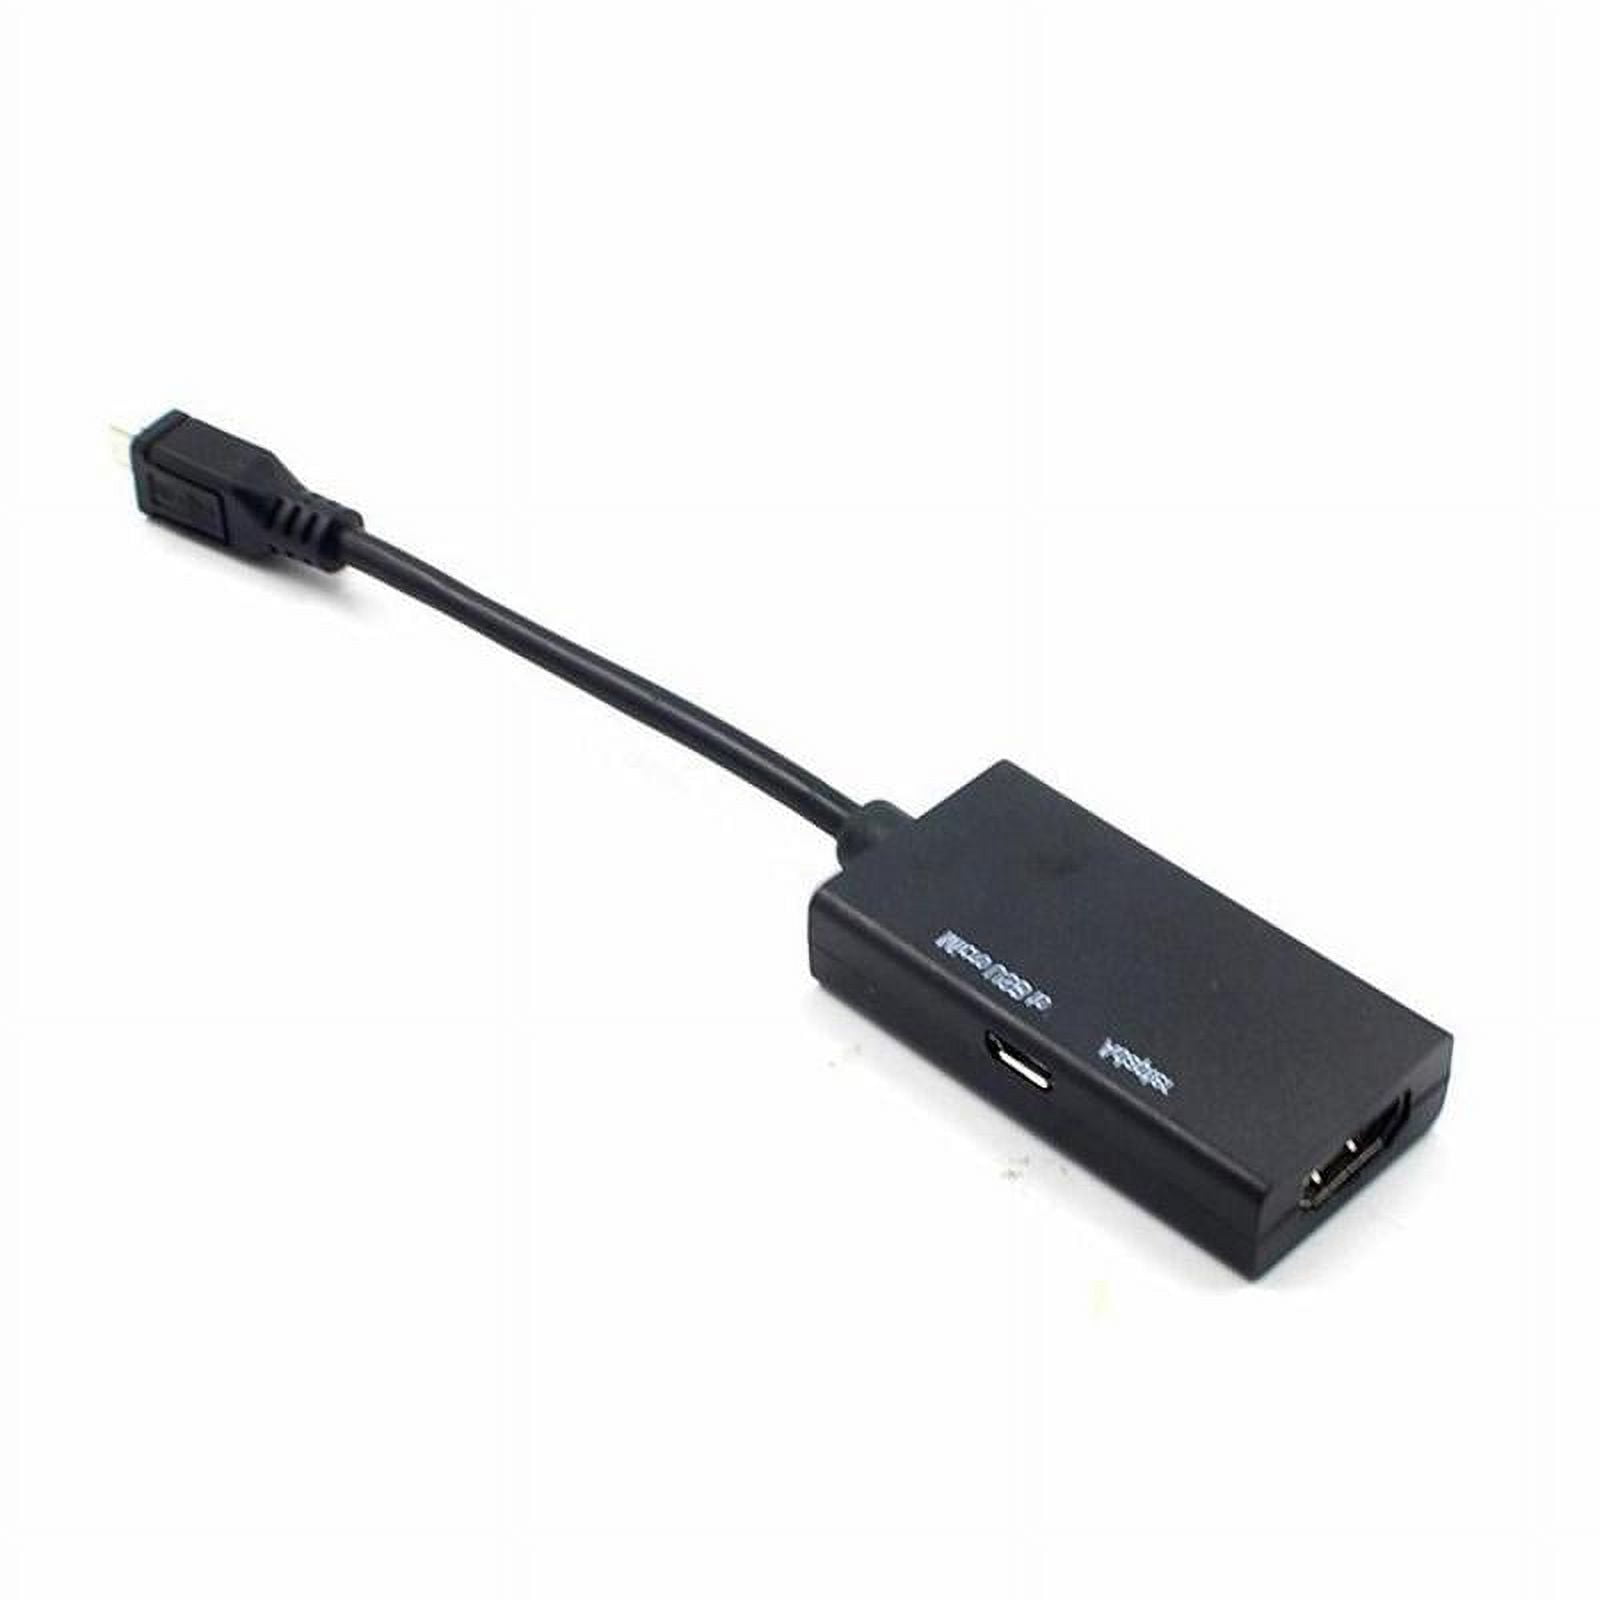 29351 - Mobile Device USB Micro-B to HDMI Display MHL Adapter Cable